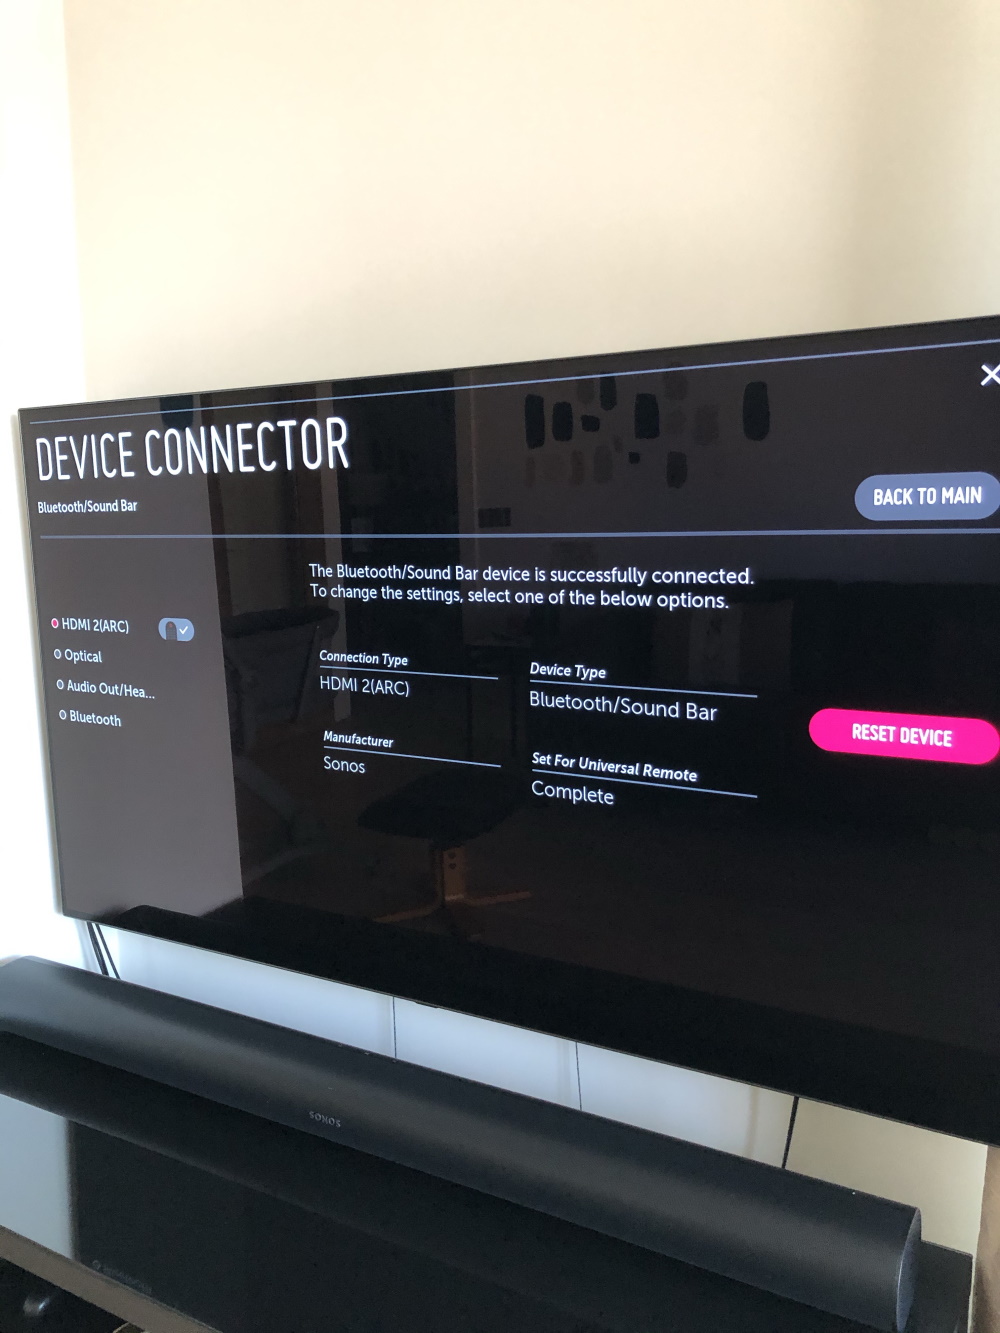 Reset Device Connector option